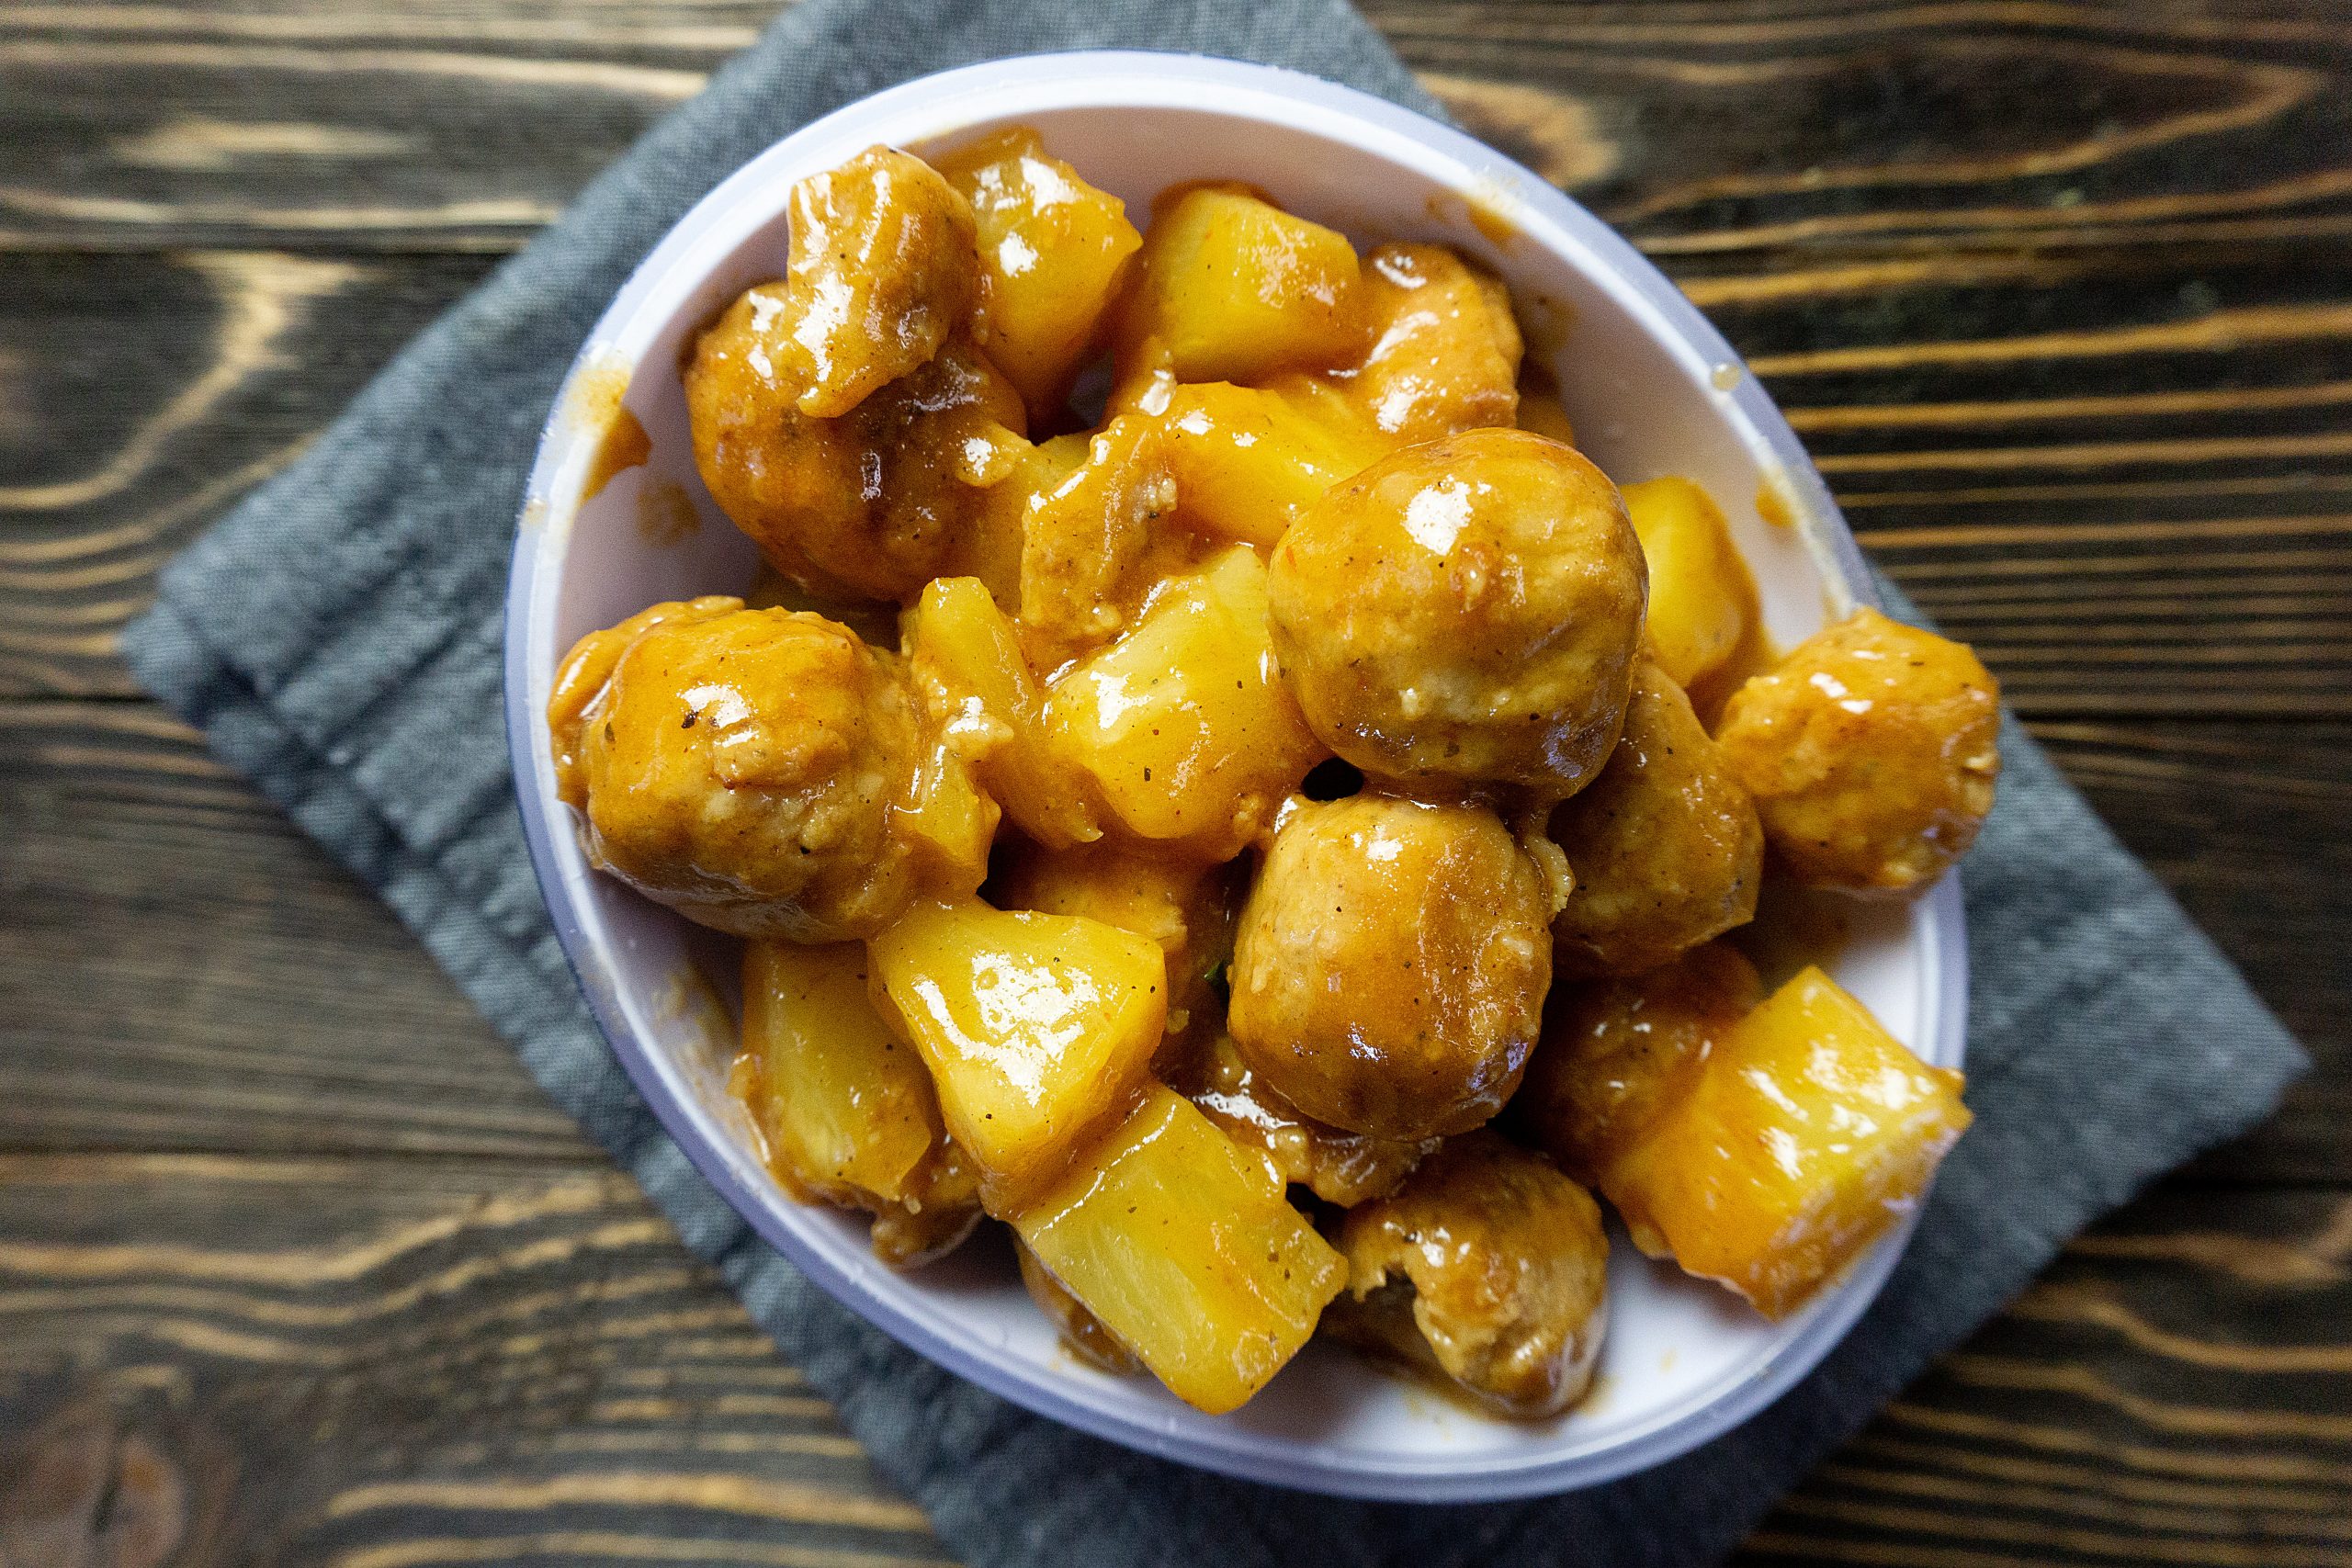 The Best Pineapple Meatballs Recipe - IP, Stove or Slow Cooker